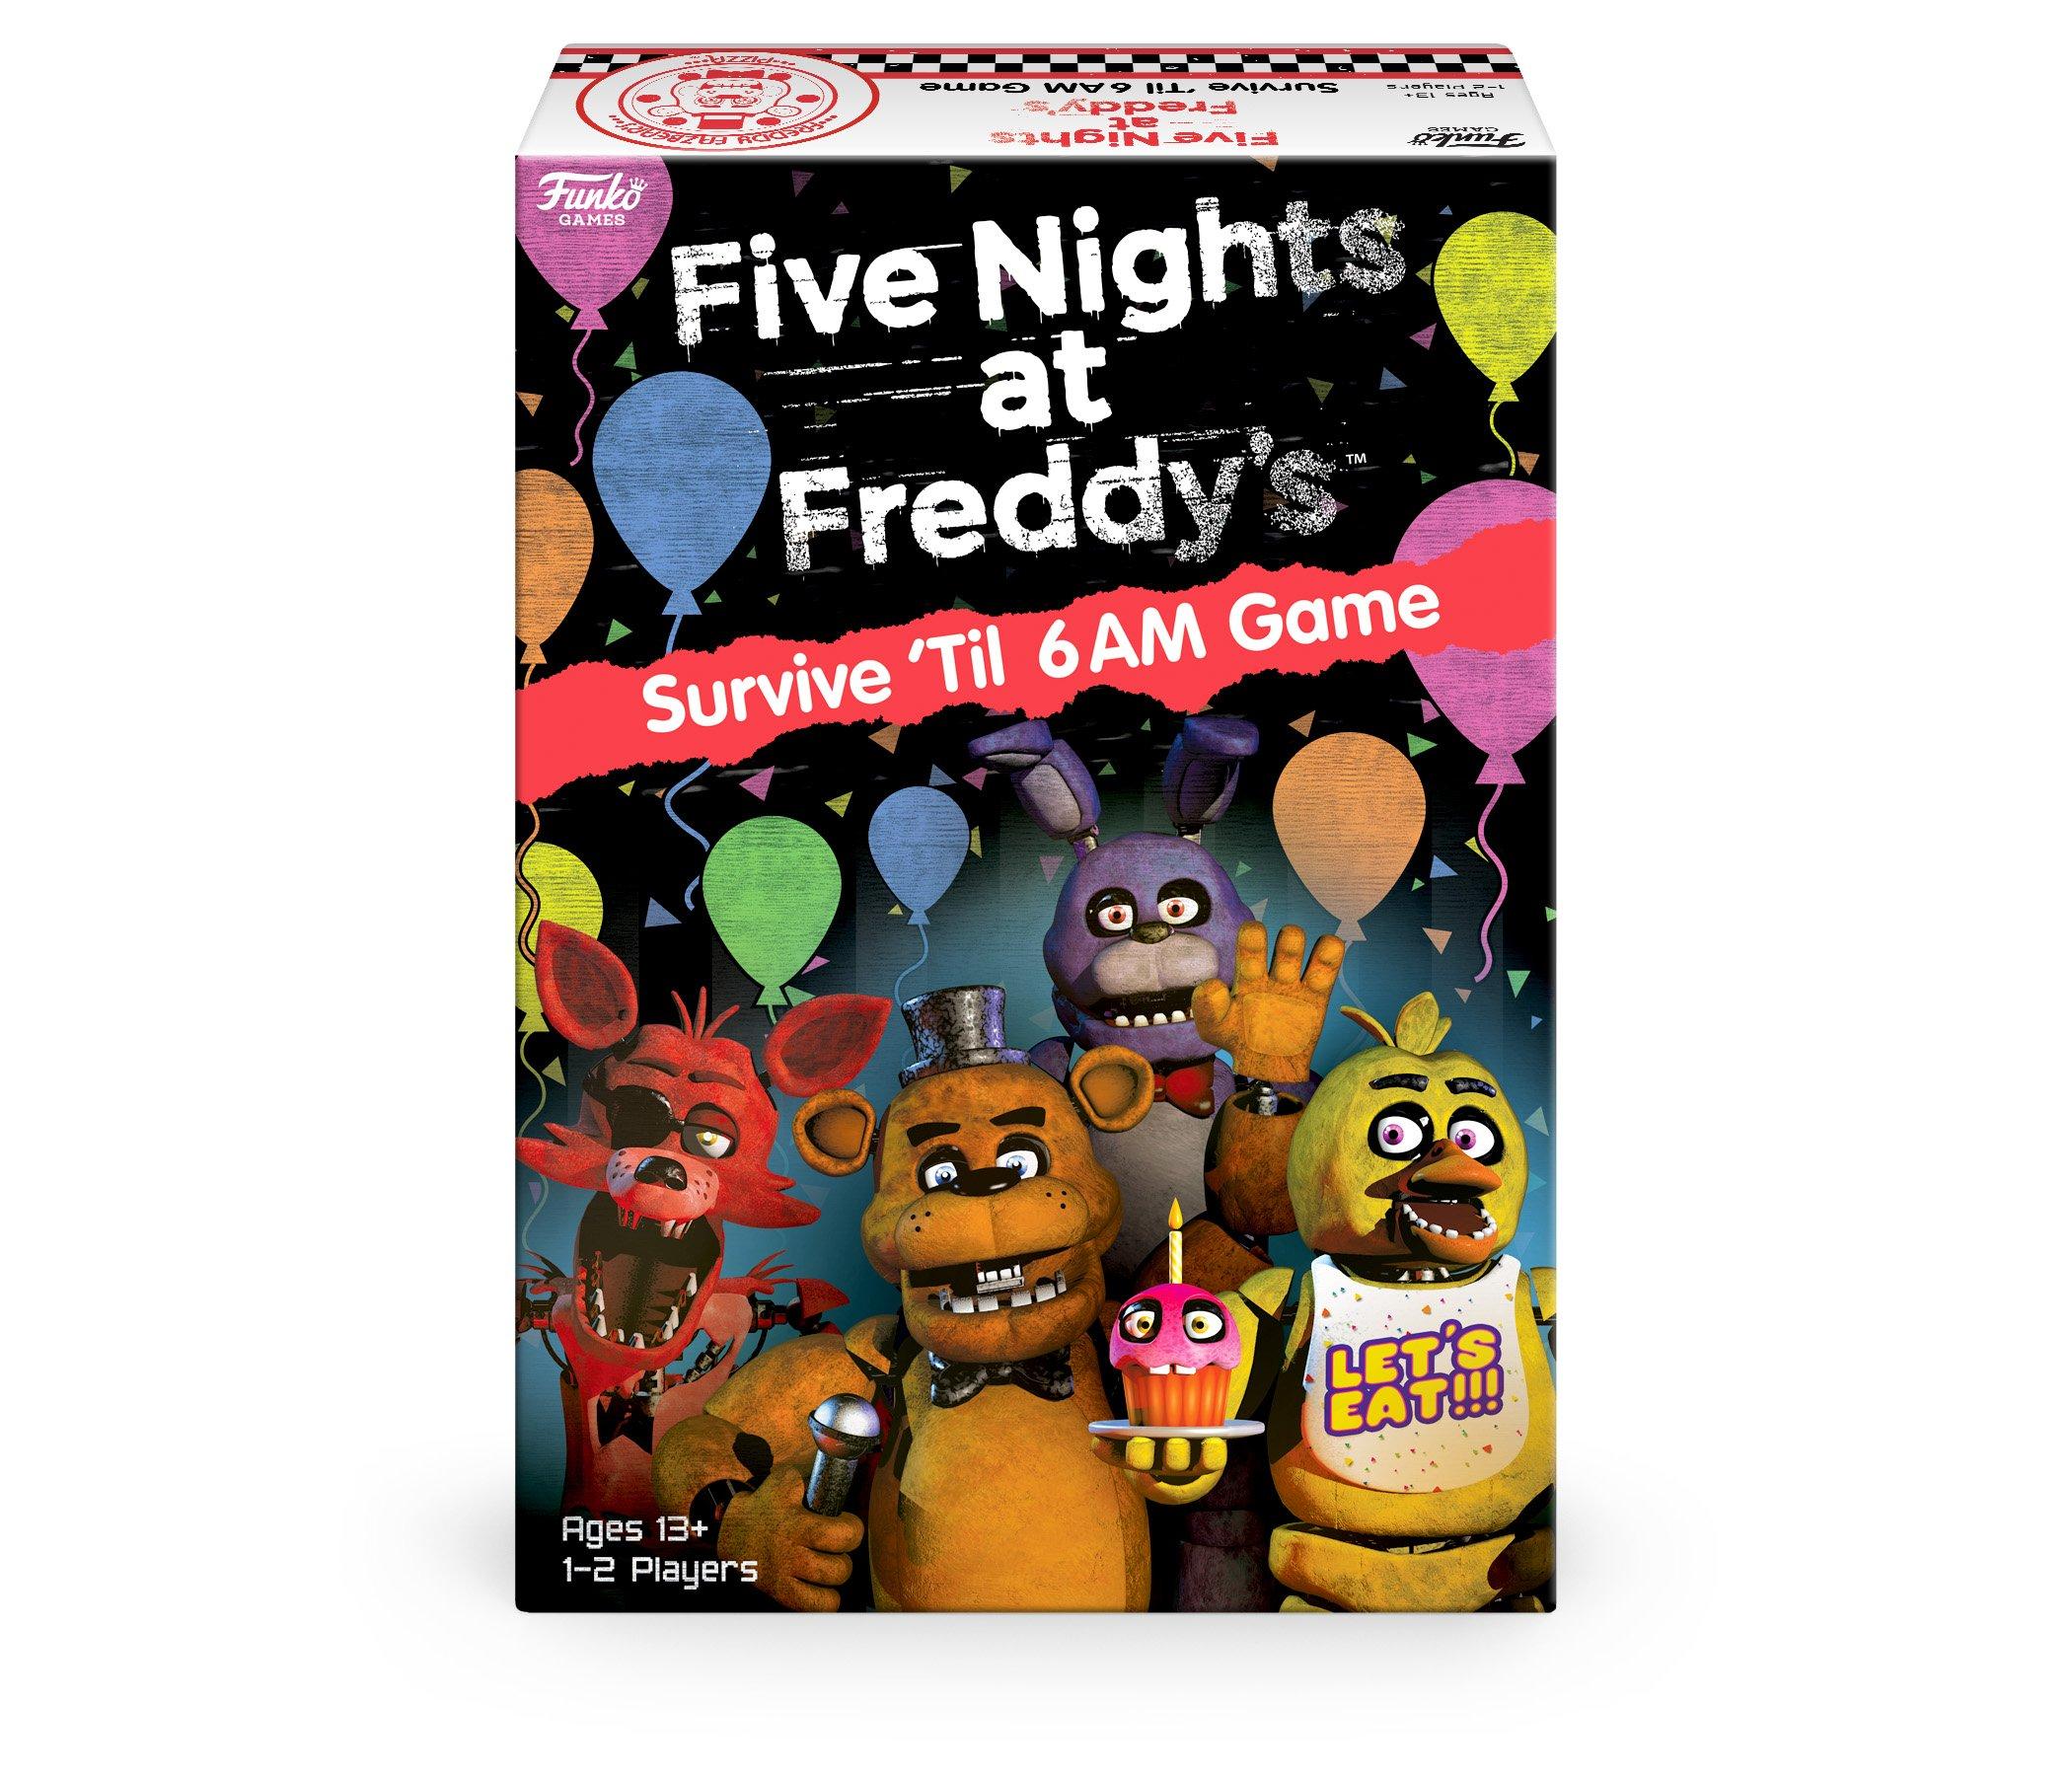 Available Now: GameStop Exclusive Five Nights at Freddy's Animatronic  Freddy & Foxy!